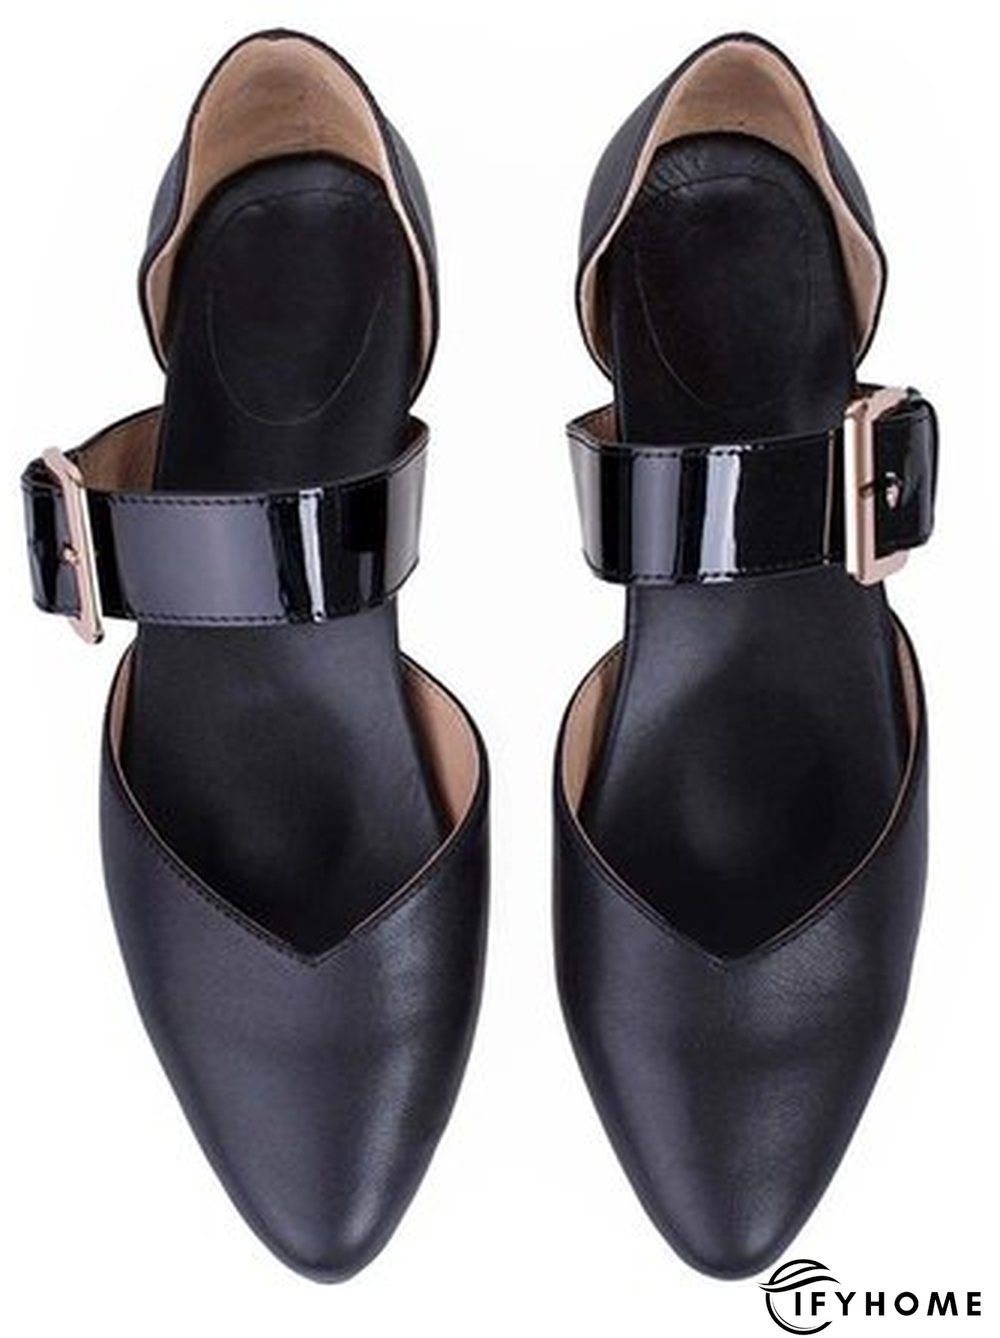 Women's Simple Buckle Casual High Heels | IFYHOME